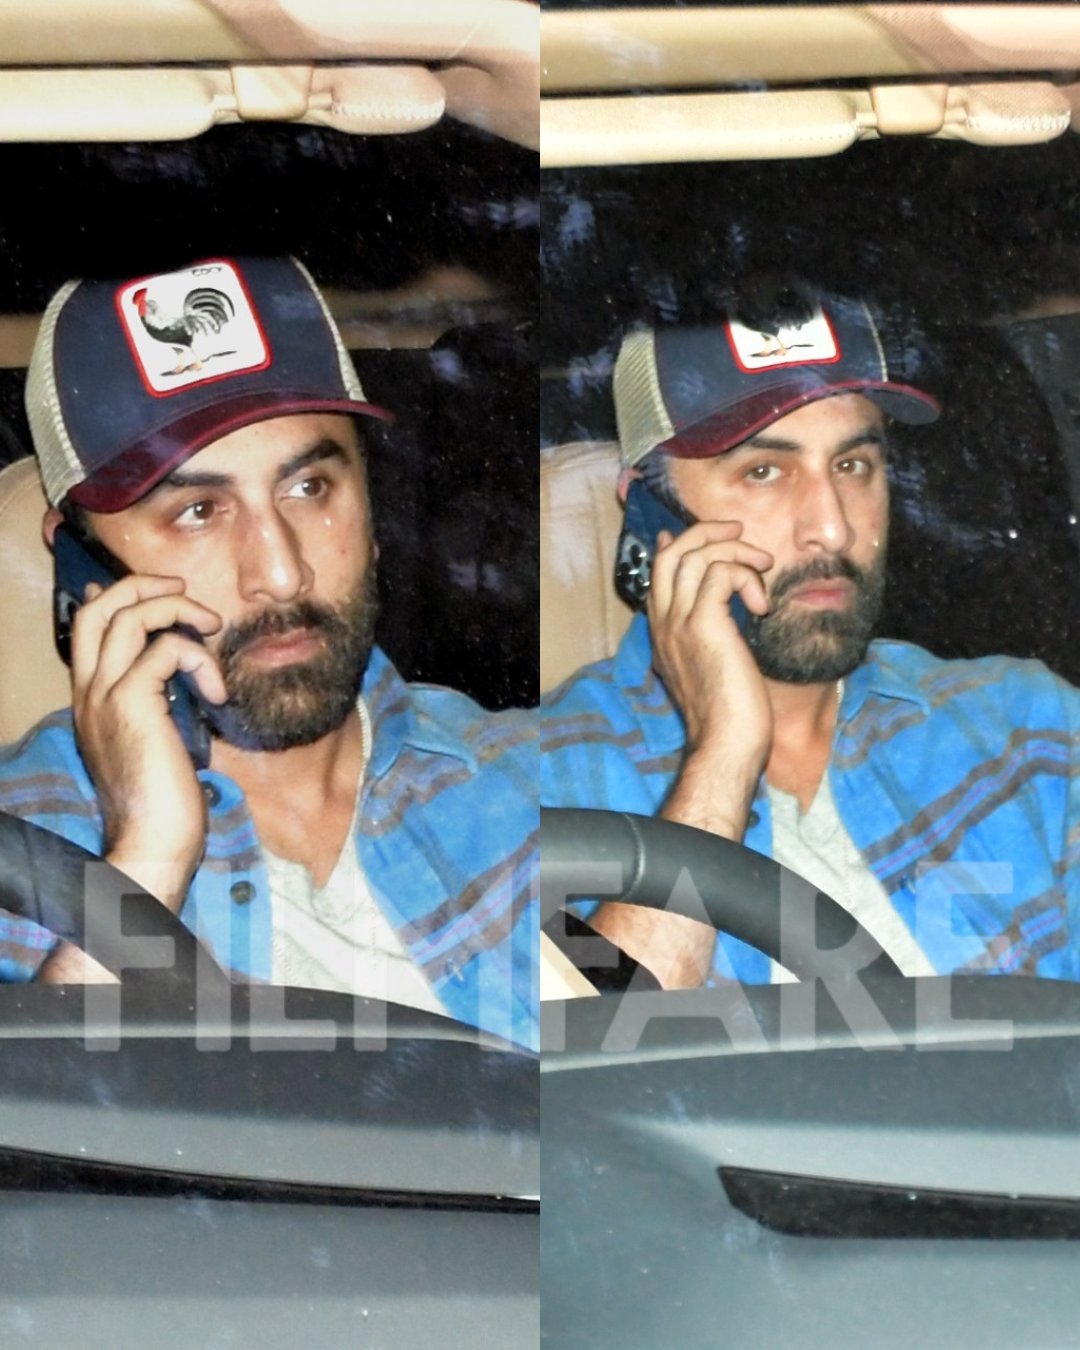 Filmfare on X: #RanbirKapoor rocking a dual print shirt as he's snapped in  the city.  / X